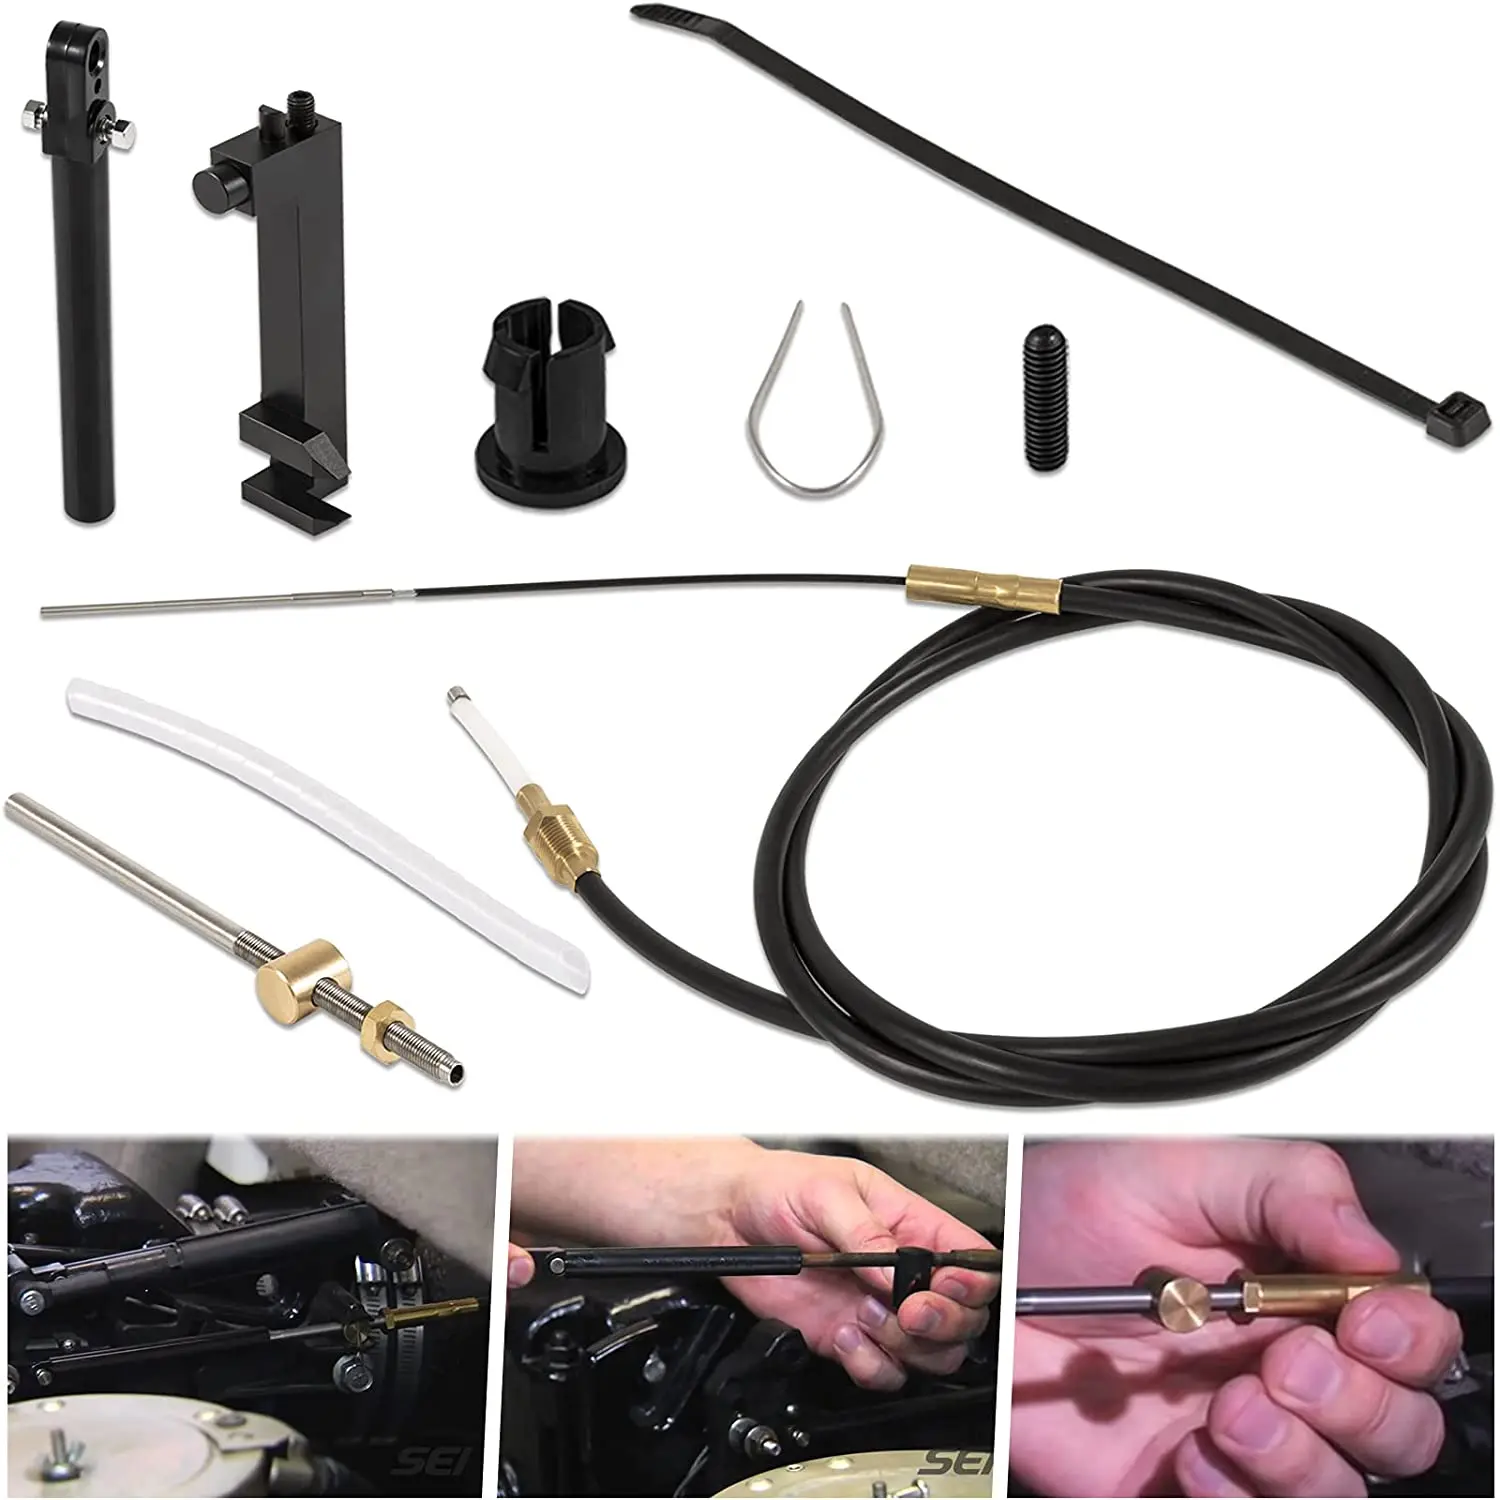 

865436A03 Lower Shift Cable Kit Yacht Accessories For MerCruiser Stern Drives MC-I R MR Alpha One Gen II